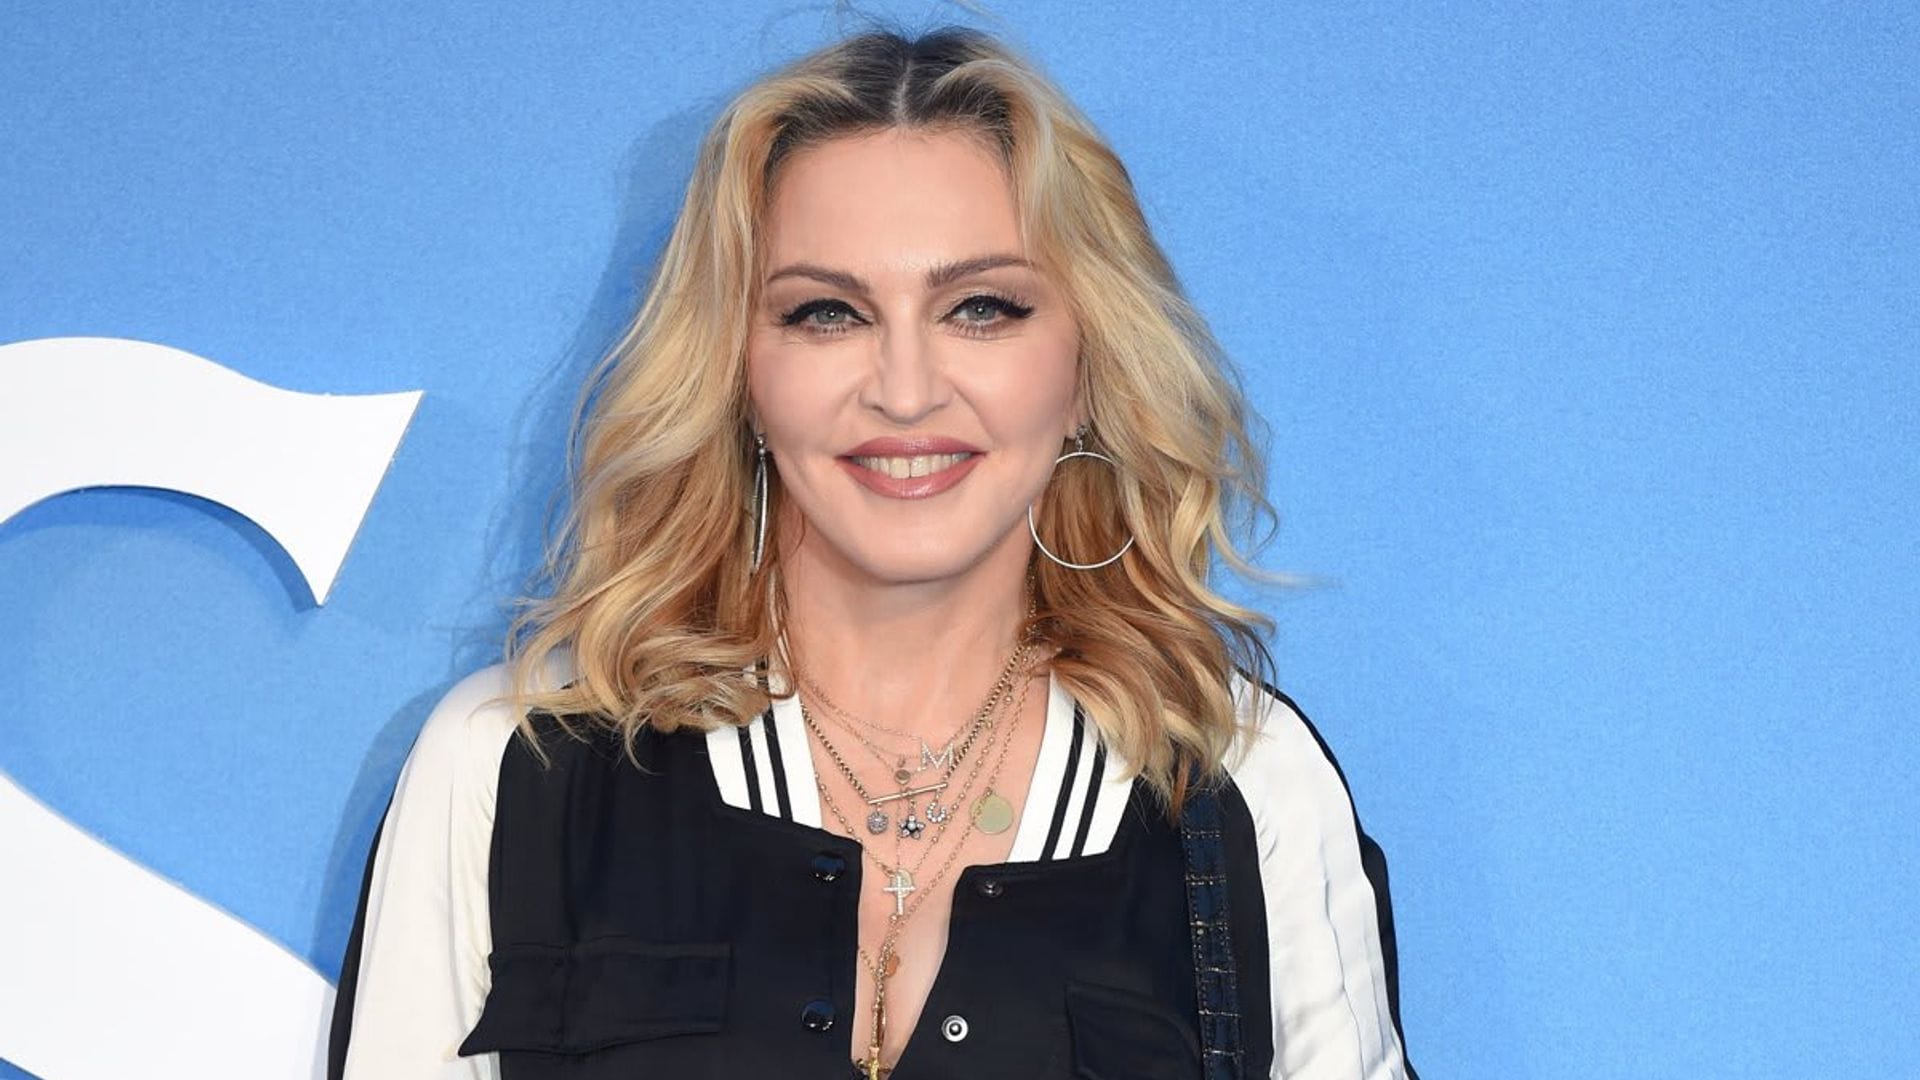 Madonna says she’s been “checking in” on Britney Spears